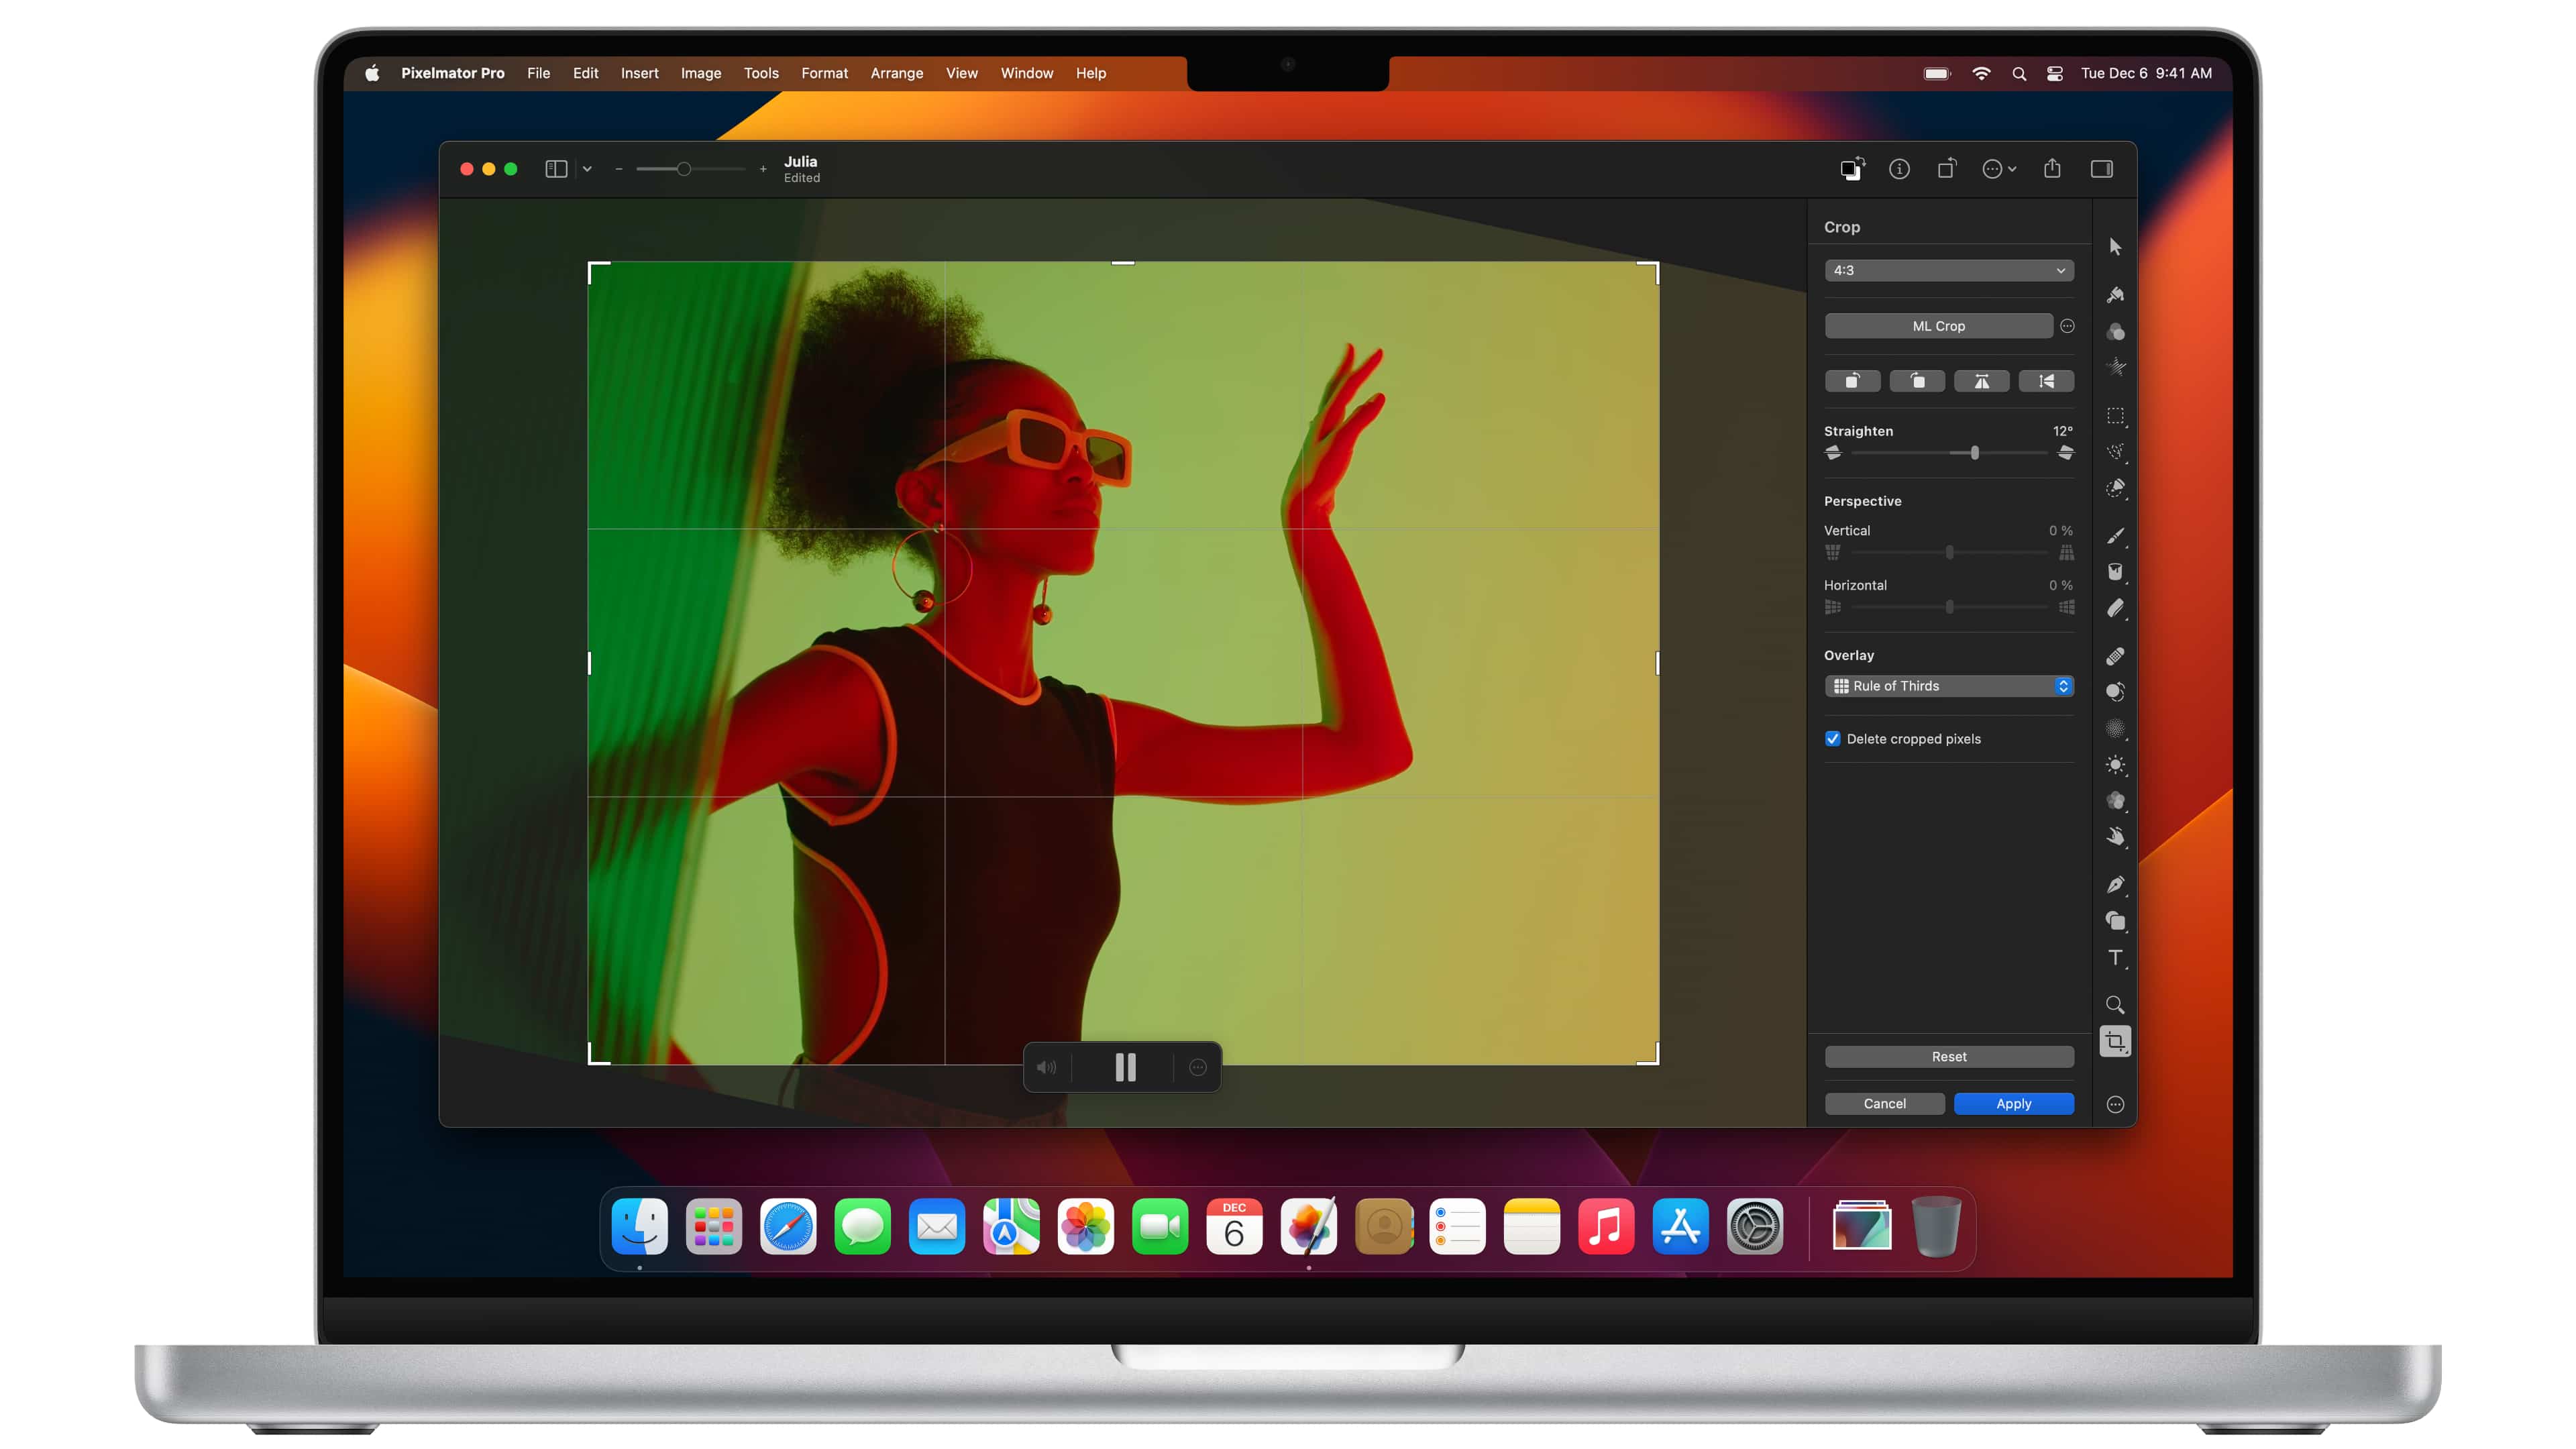 Showcasing basic video editing support in Pixelmator Pro 3.2 for macOS